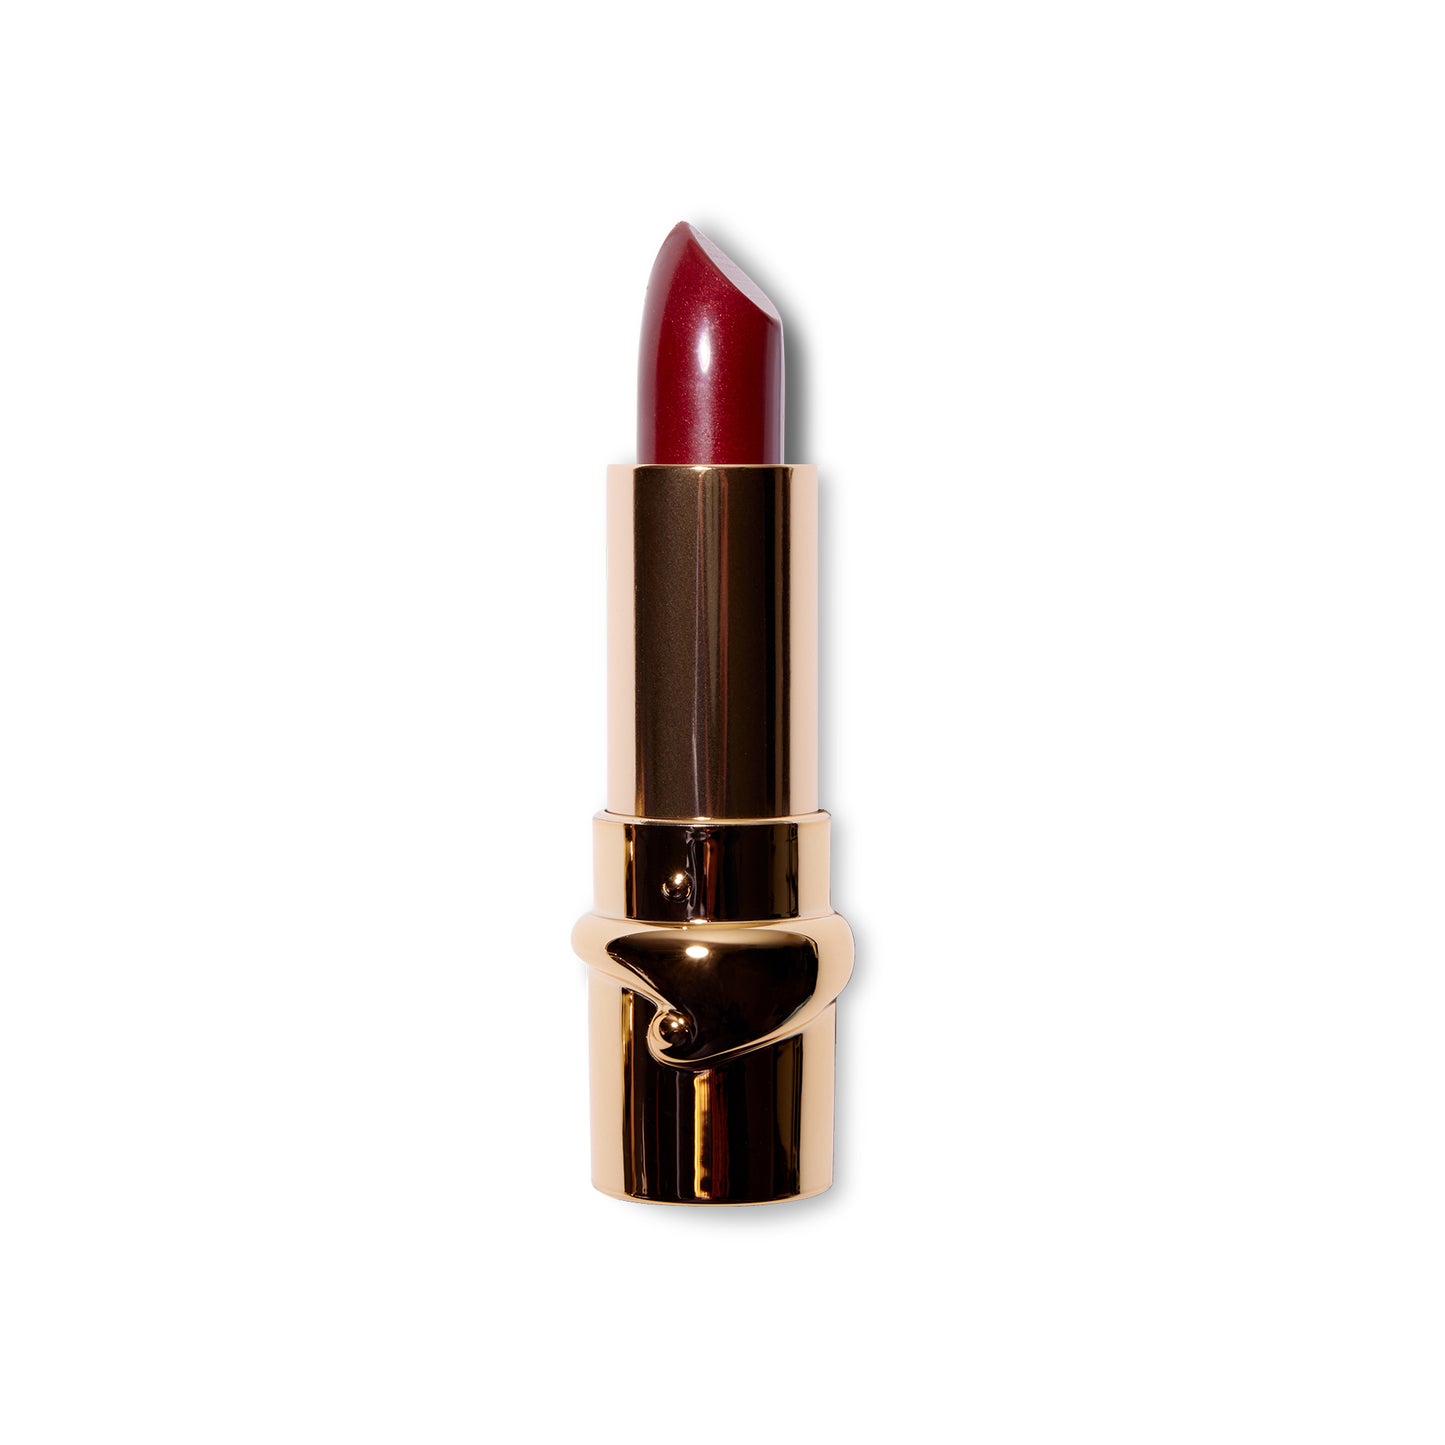 The Julie Hewlett matte Noir lipstick in Sin is wound up and the bullet is visible in the gold component. 